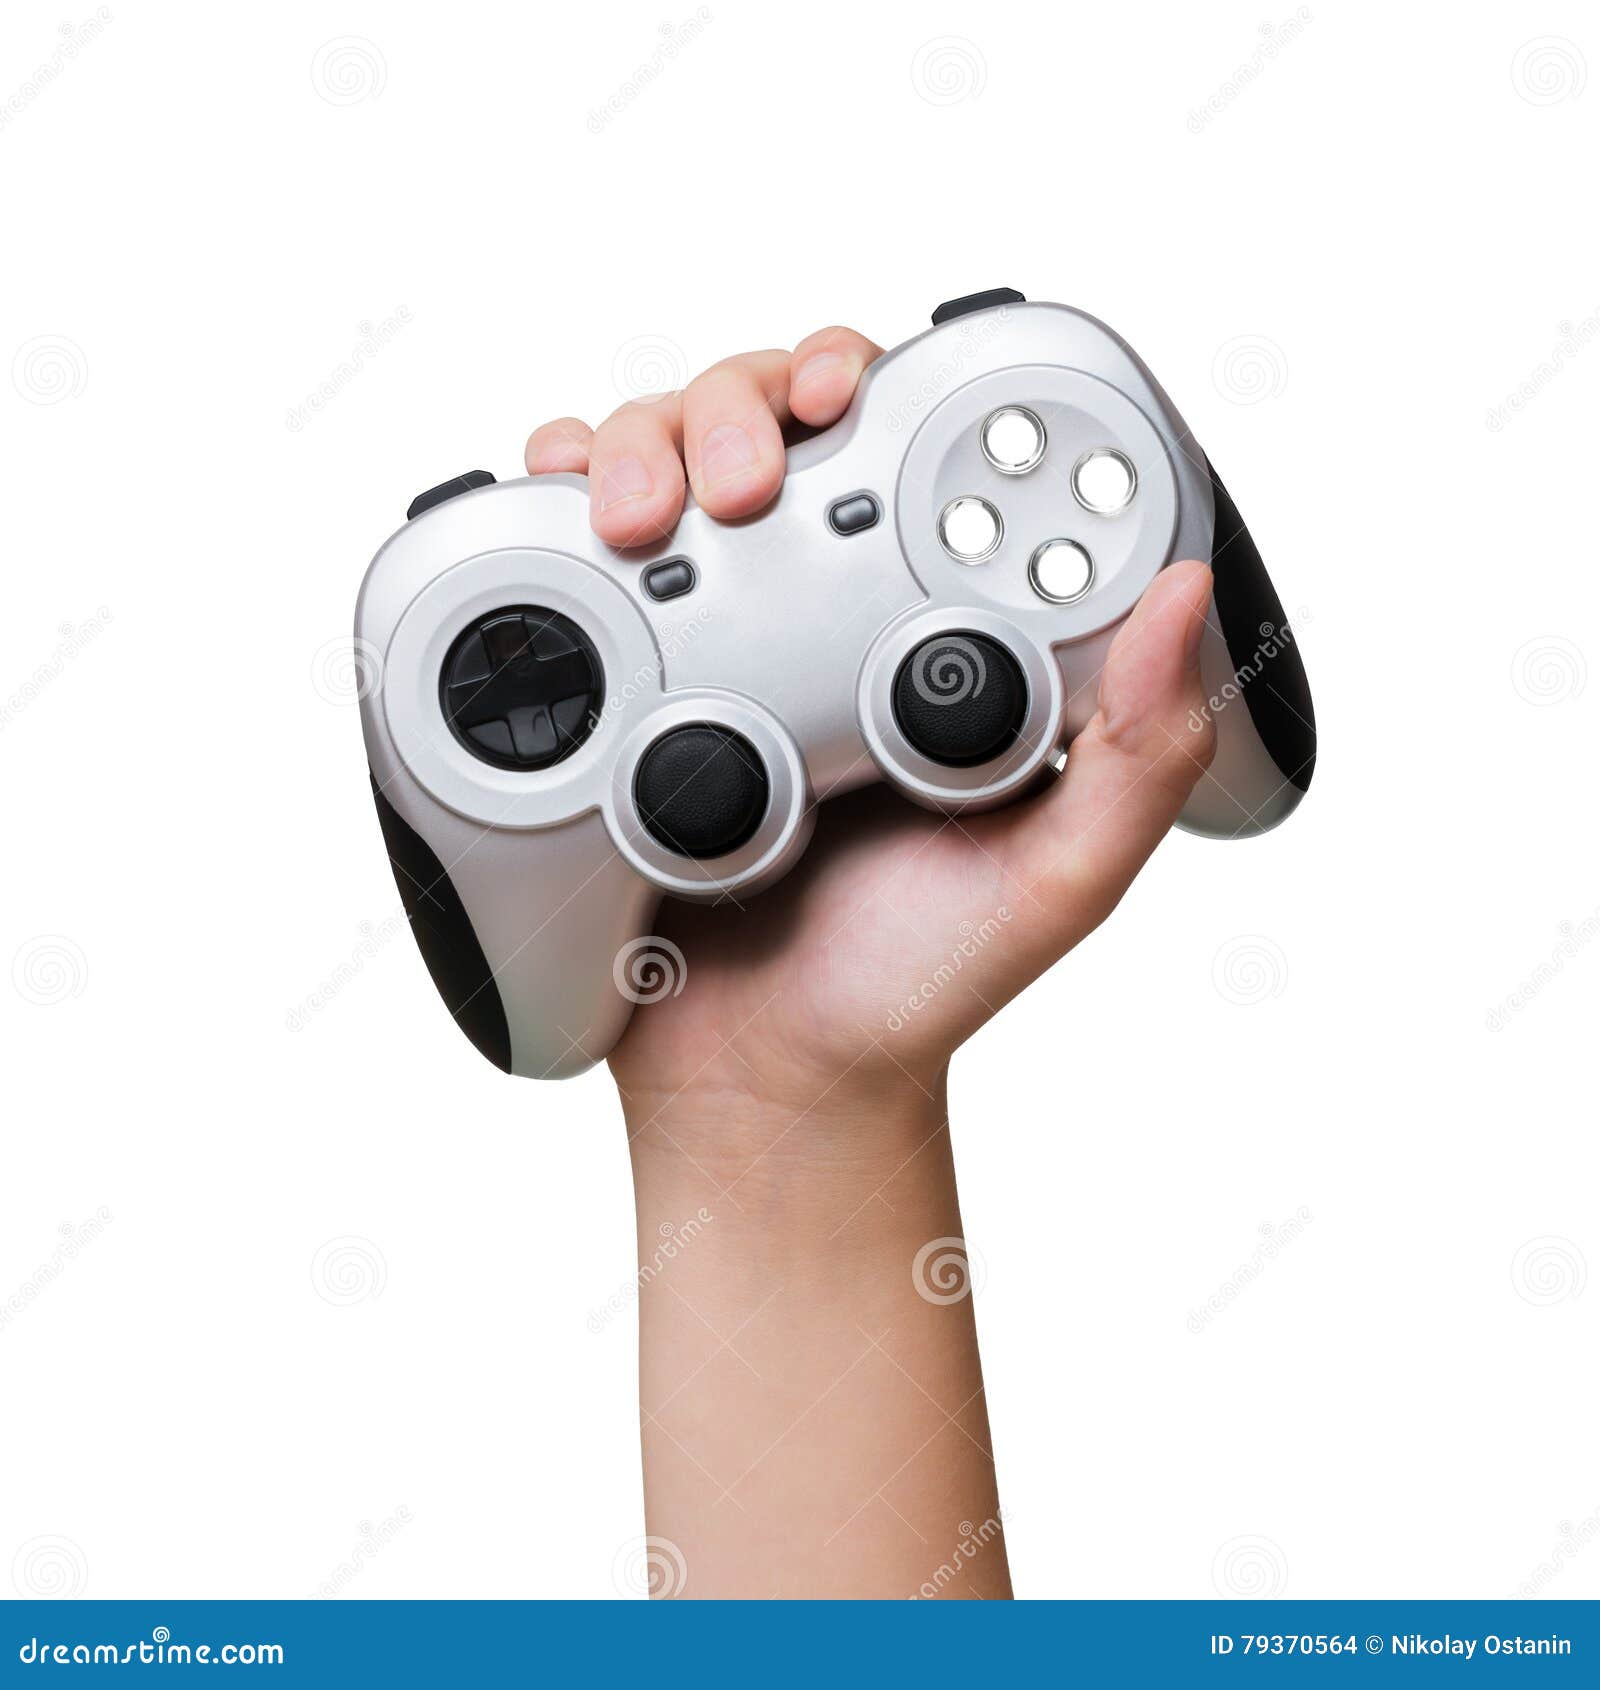 Controller in Hand Raised Isolated on White Photo - Image games, white: 79370564